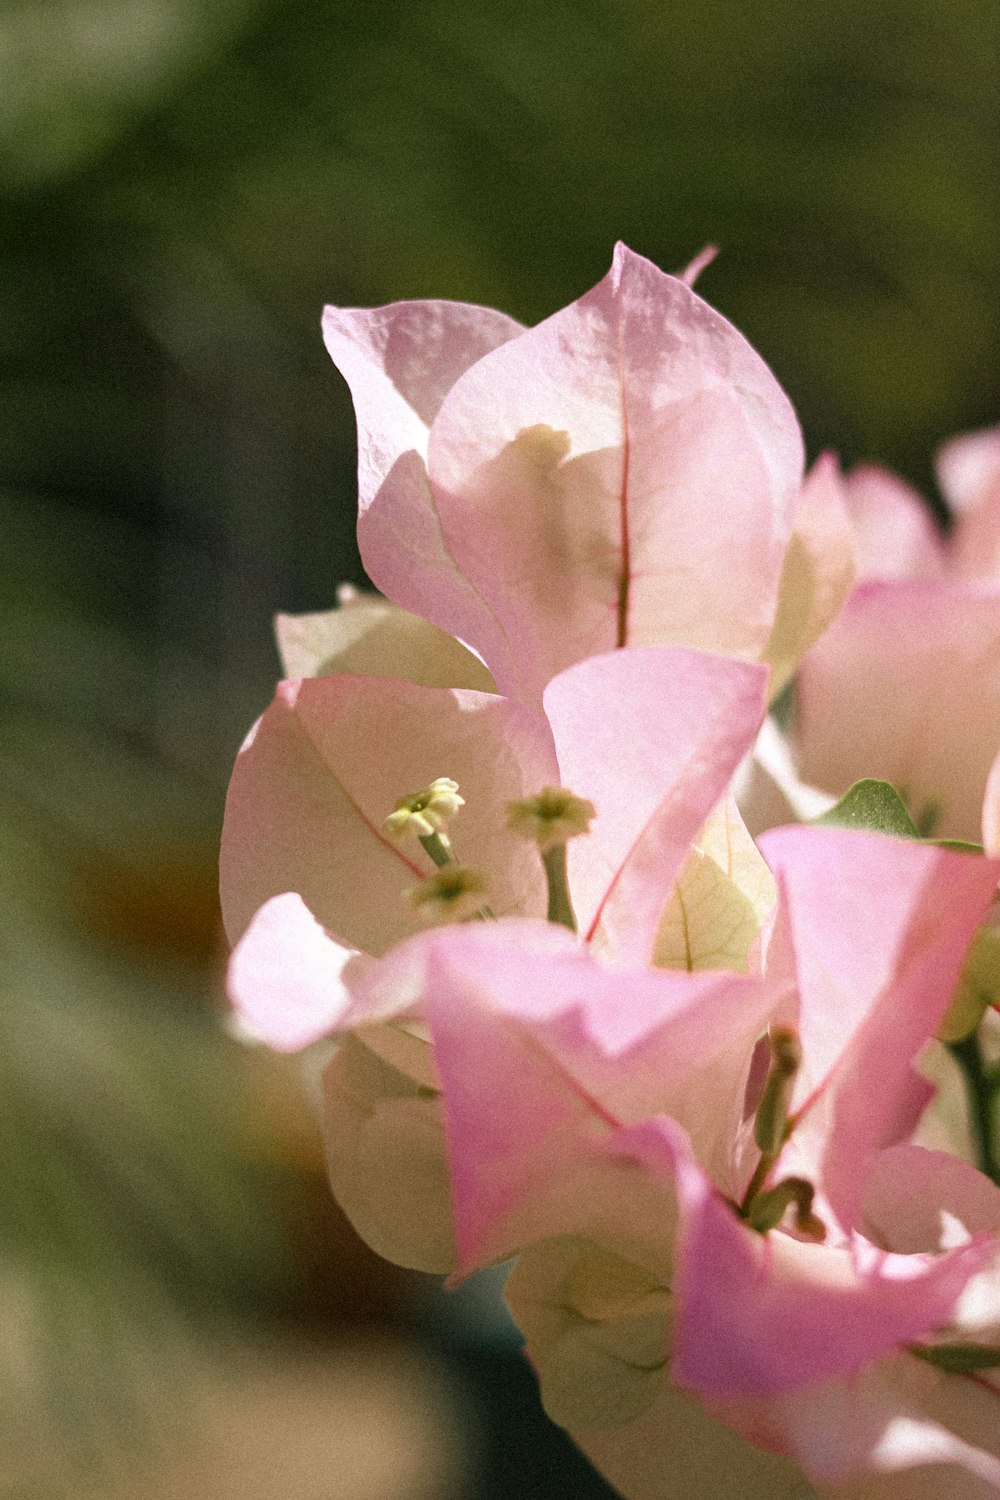 a close up of pink flowers in a vase